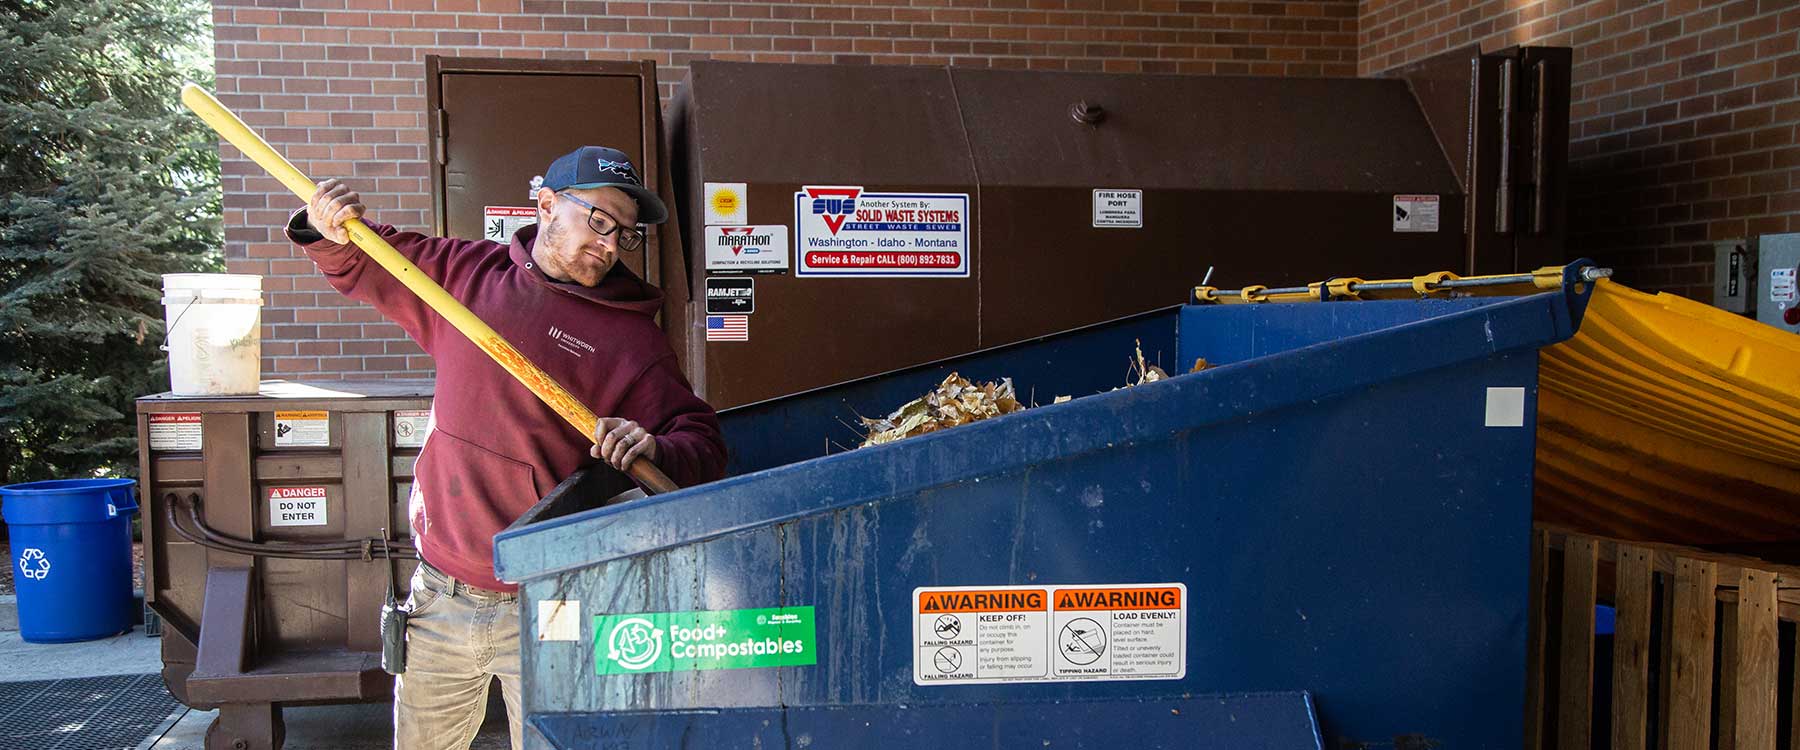 A facilities services staff member uses a shovel to rotate the contents of a compost bin.